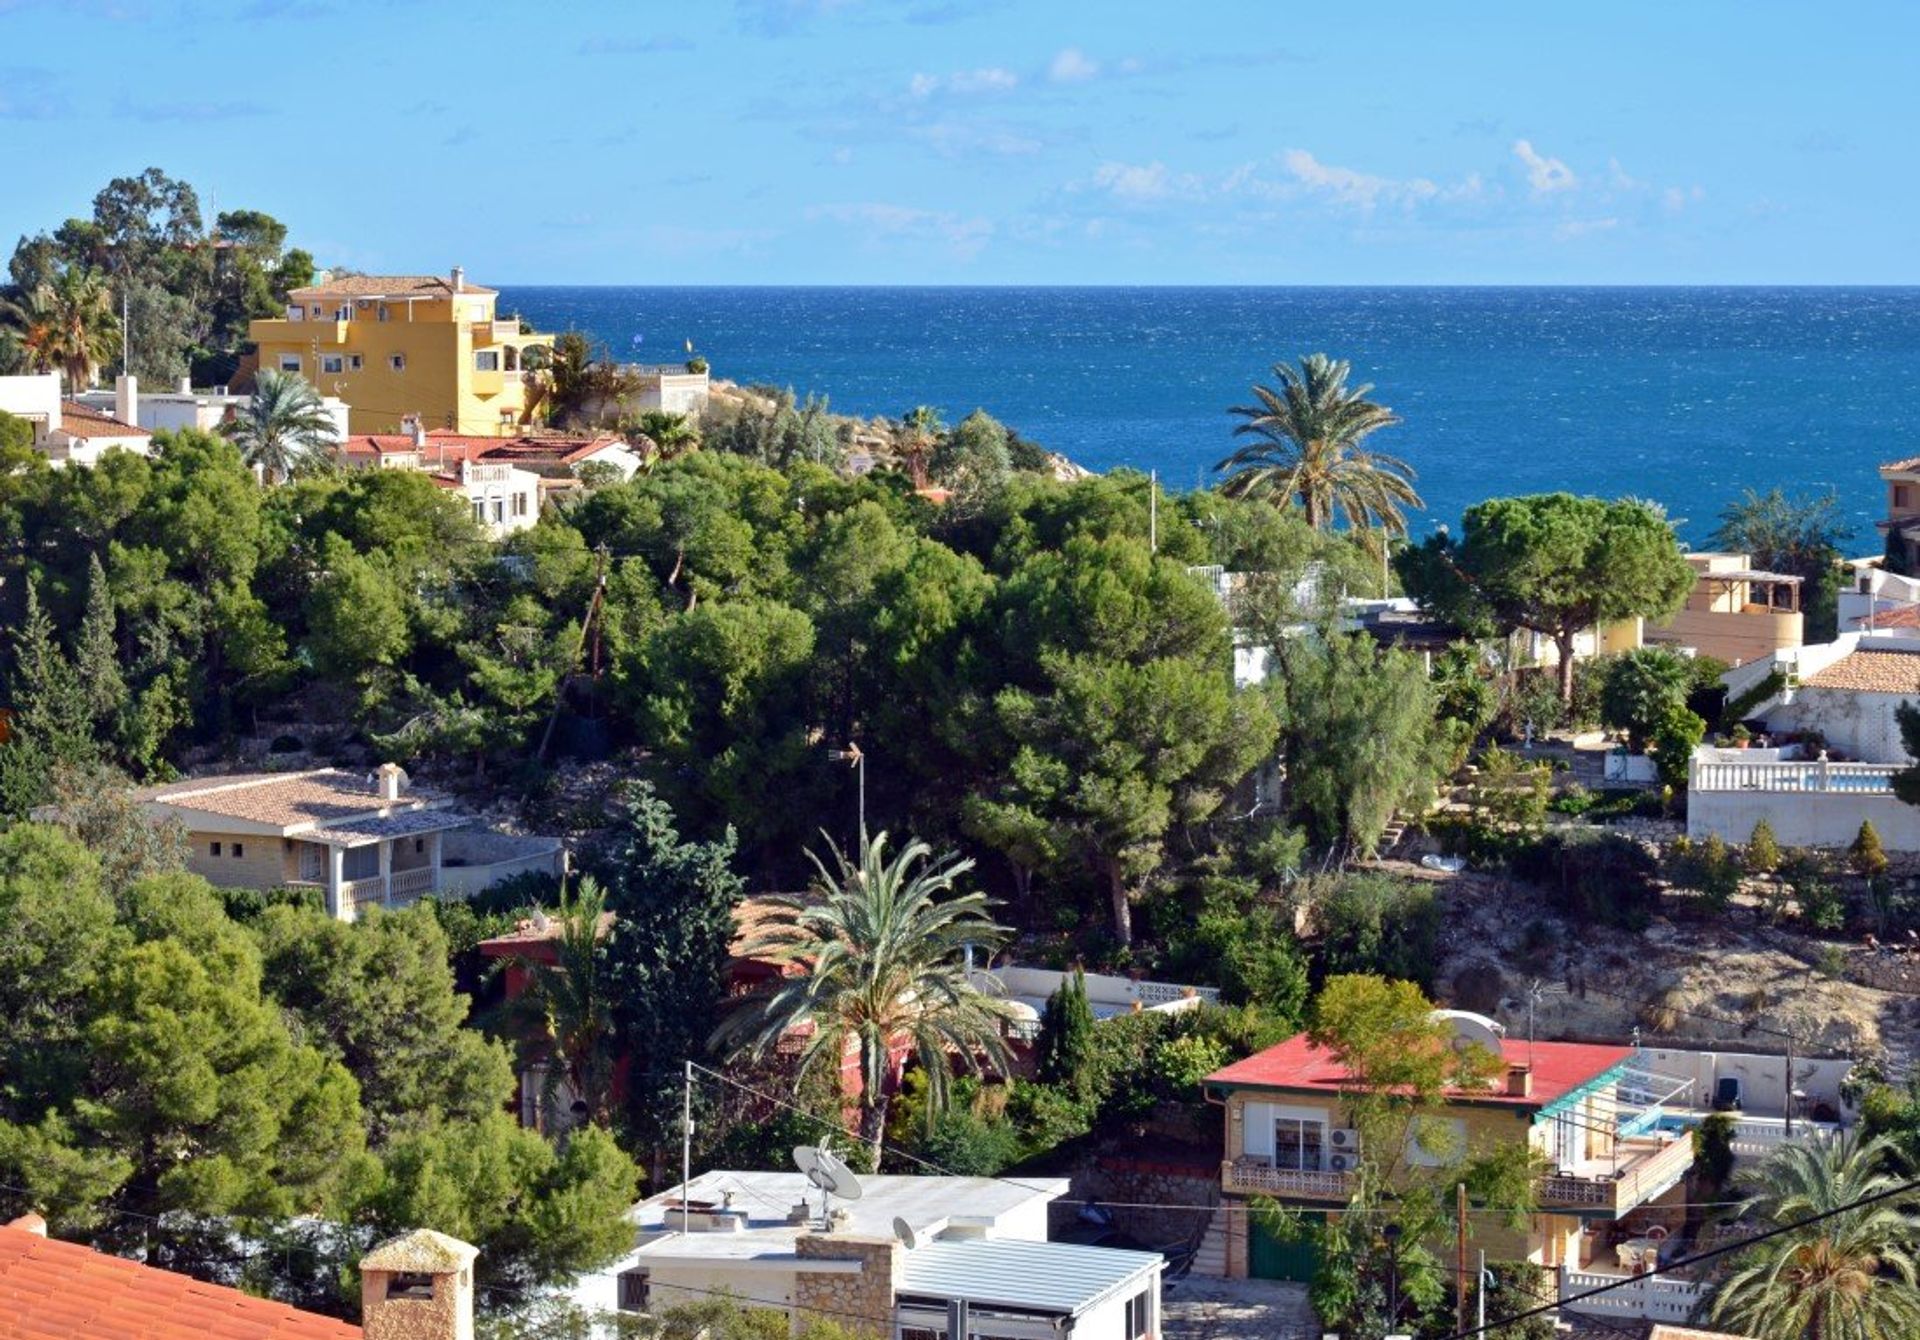 Coveta Fuma, part of the district of El Campello nestled between the beaches and mountains